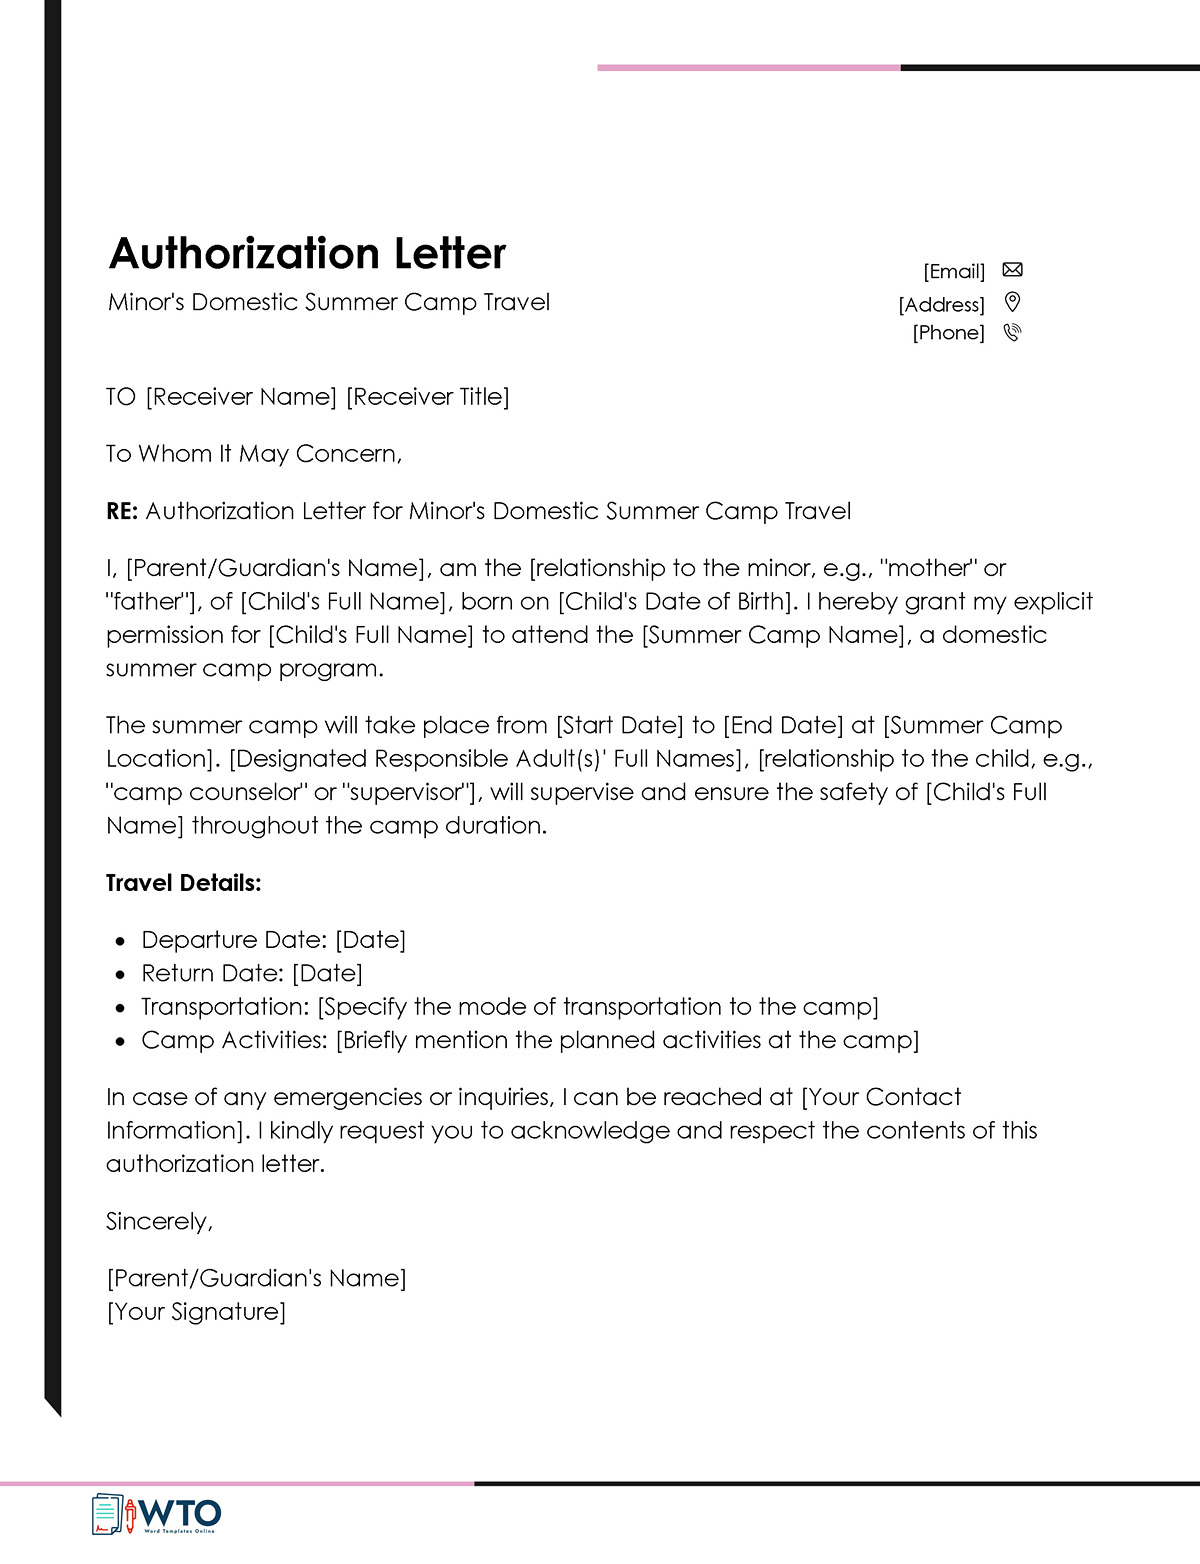 Authorization Letter toTravel with Minor Template-Word Format